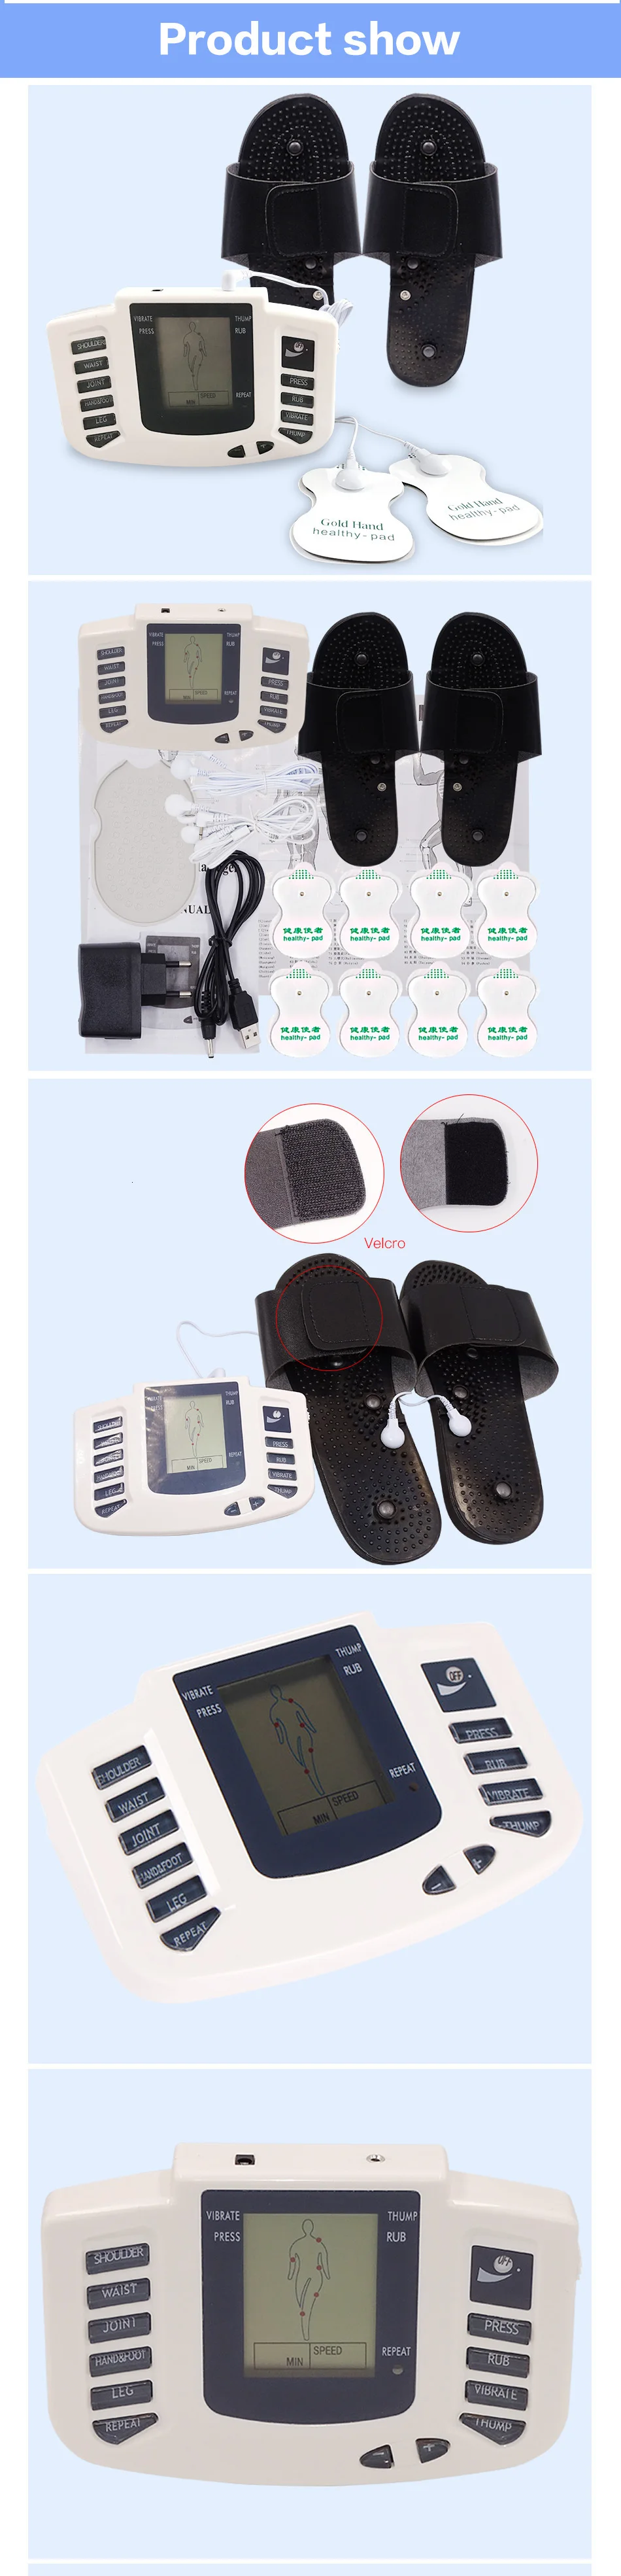 12 Buttons Electric Herald Tens Muscle Stimulator EMS Acupuncture Body Massage Digital Therapy Machine Electrostimulator 823BR